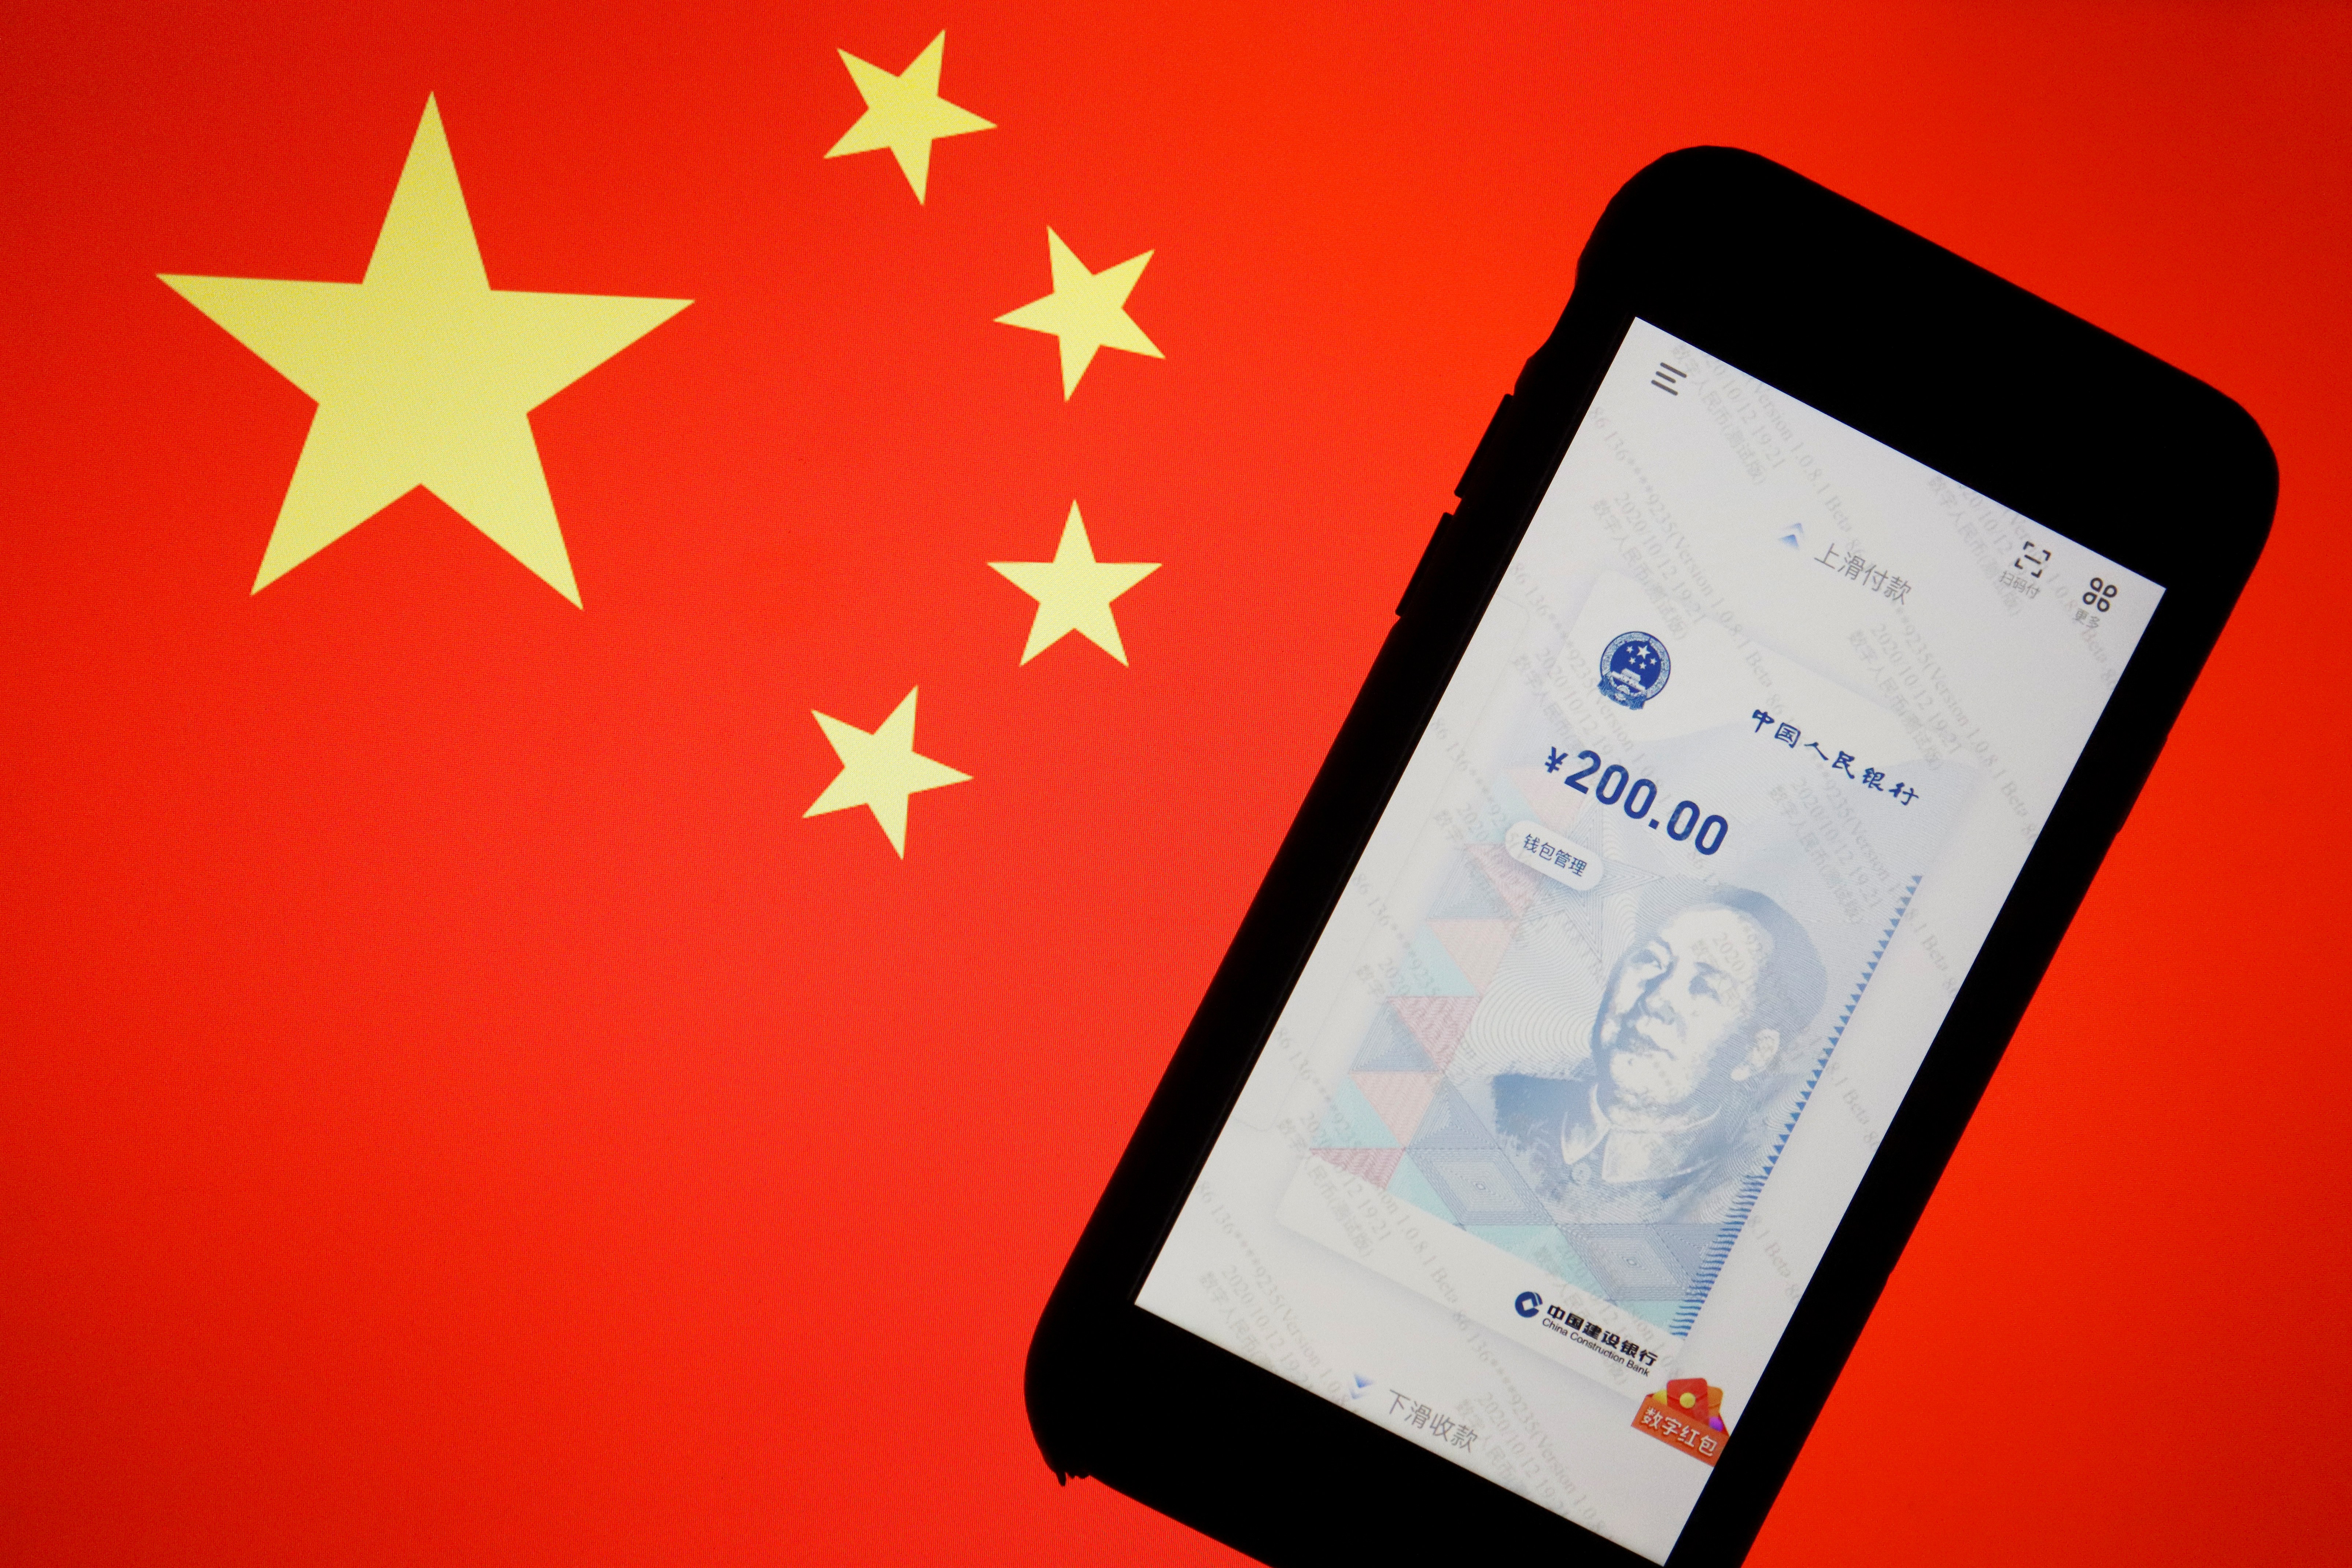 China's official app for digital yuan is seen on a mobile phone placed in front of an image of the Chinese flag, in this illustration picture taken October 16, 2020. REUTERS/Florence Lo/Illustration